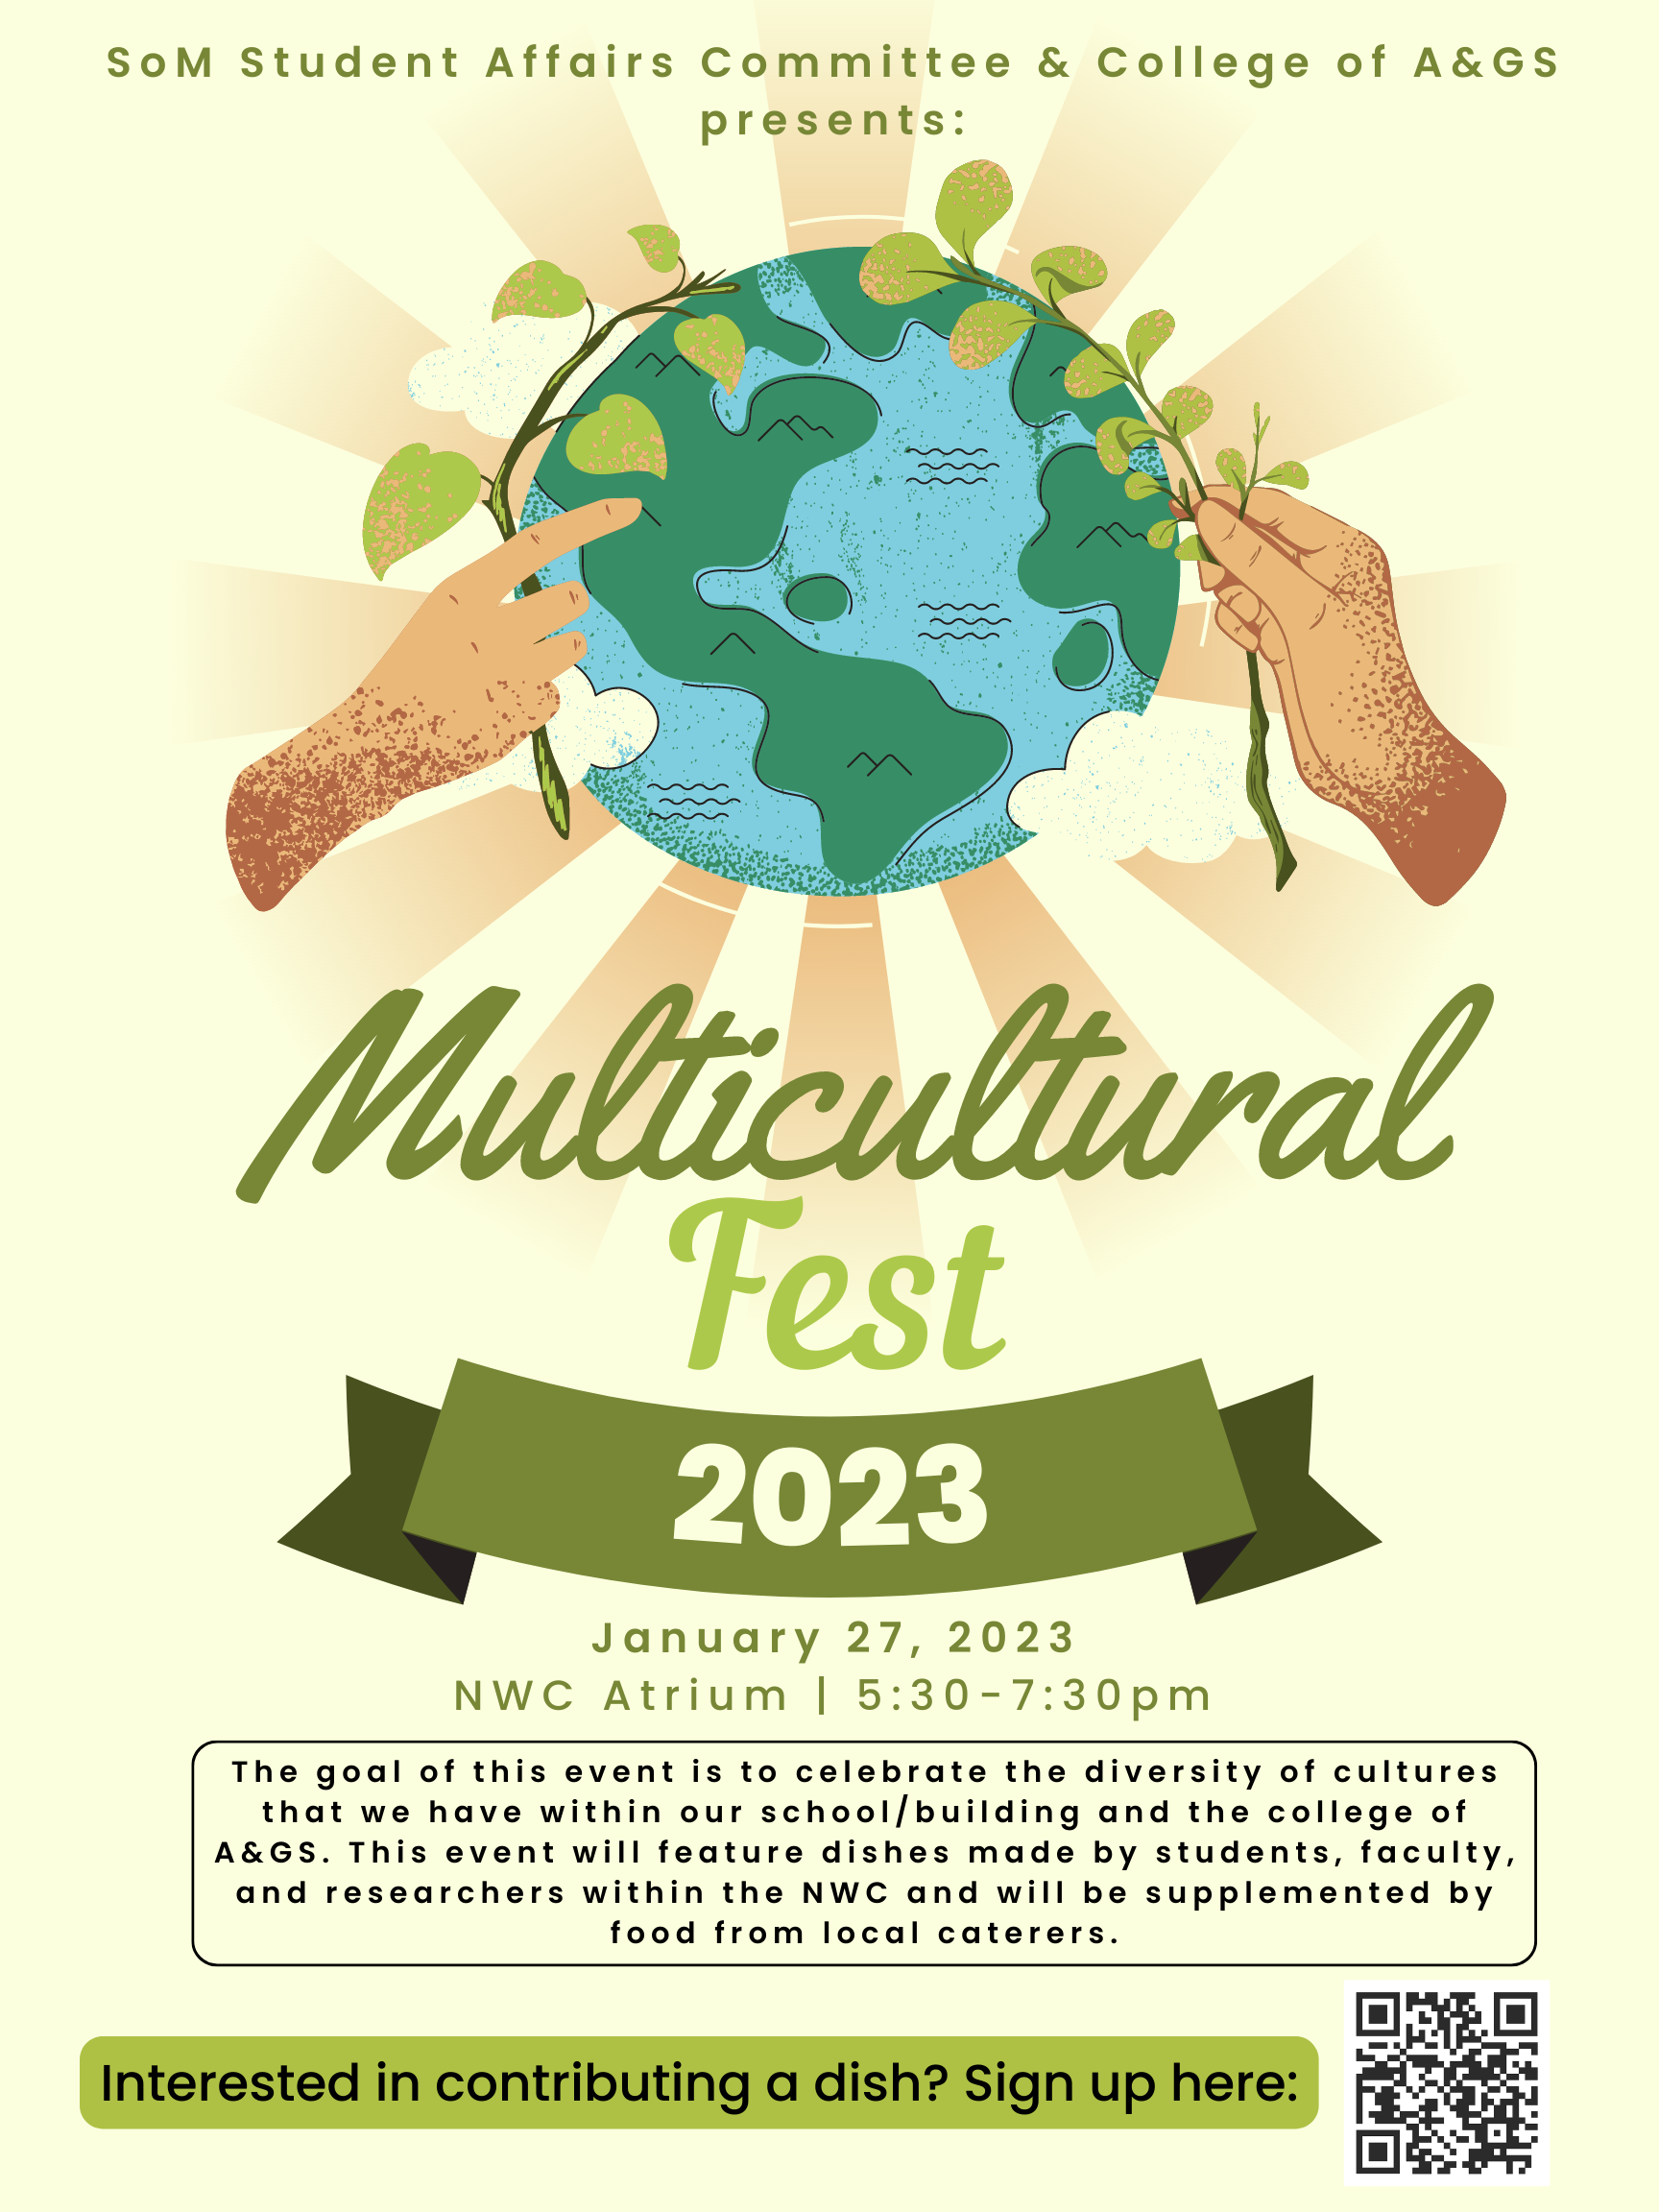 Multicultural festival 2023 is presented by the SoM Student Affairs Committee and the College of A&GS. The event will be on Janruary 27th from 5:30p to 7:30p in the NWC Atrium. "The goal of this event is to celebrate the diversity of cultures that we have within our school/building and the college of A&GS. This event will feature dishes made by students, faculty, and researchers within the NW and will be supplemented by food from local caterers."